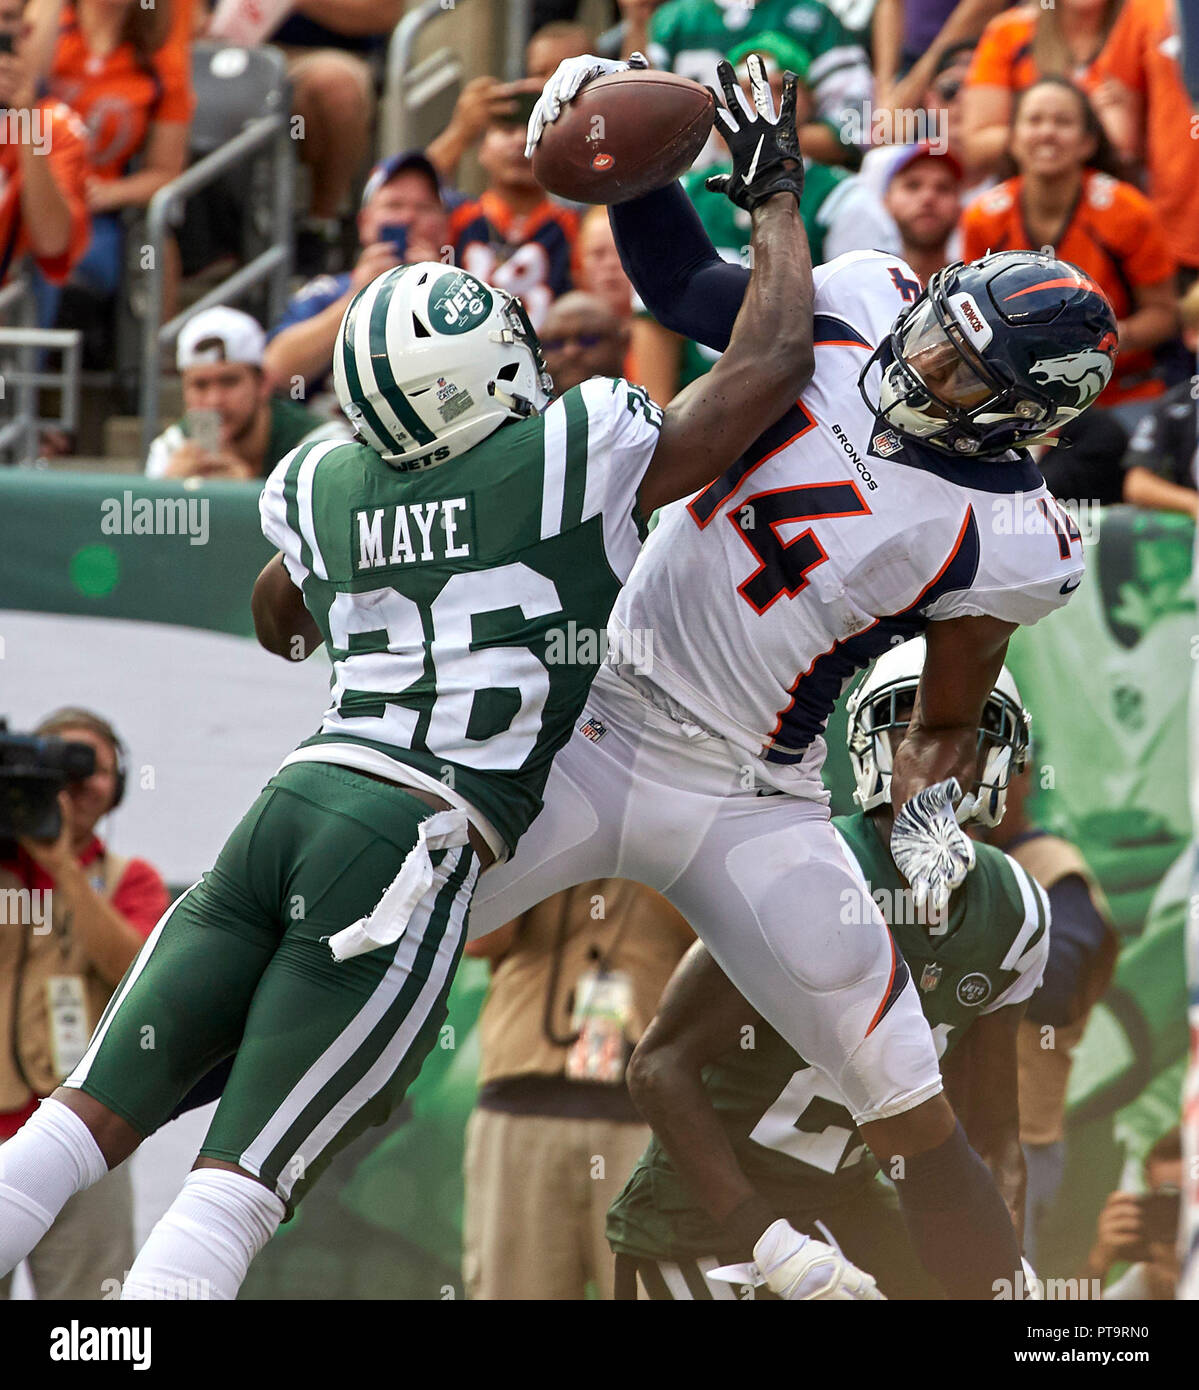 October 8, 2018 - East Rutherford, New Jersey, U.S. - New York Jets  defensive back Marcus Maye (26) breaks up a pass intended for Denver  Broncos wide receiver Courtland Sutton (14) in